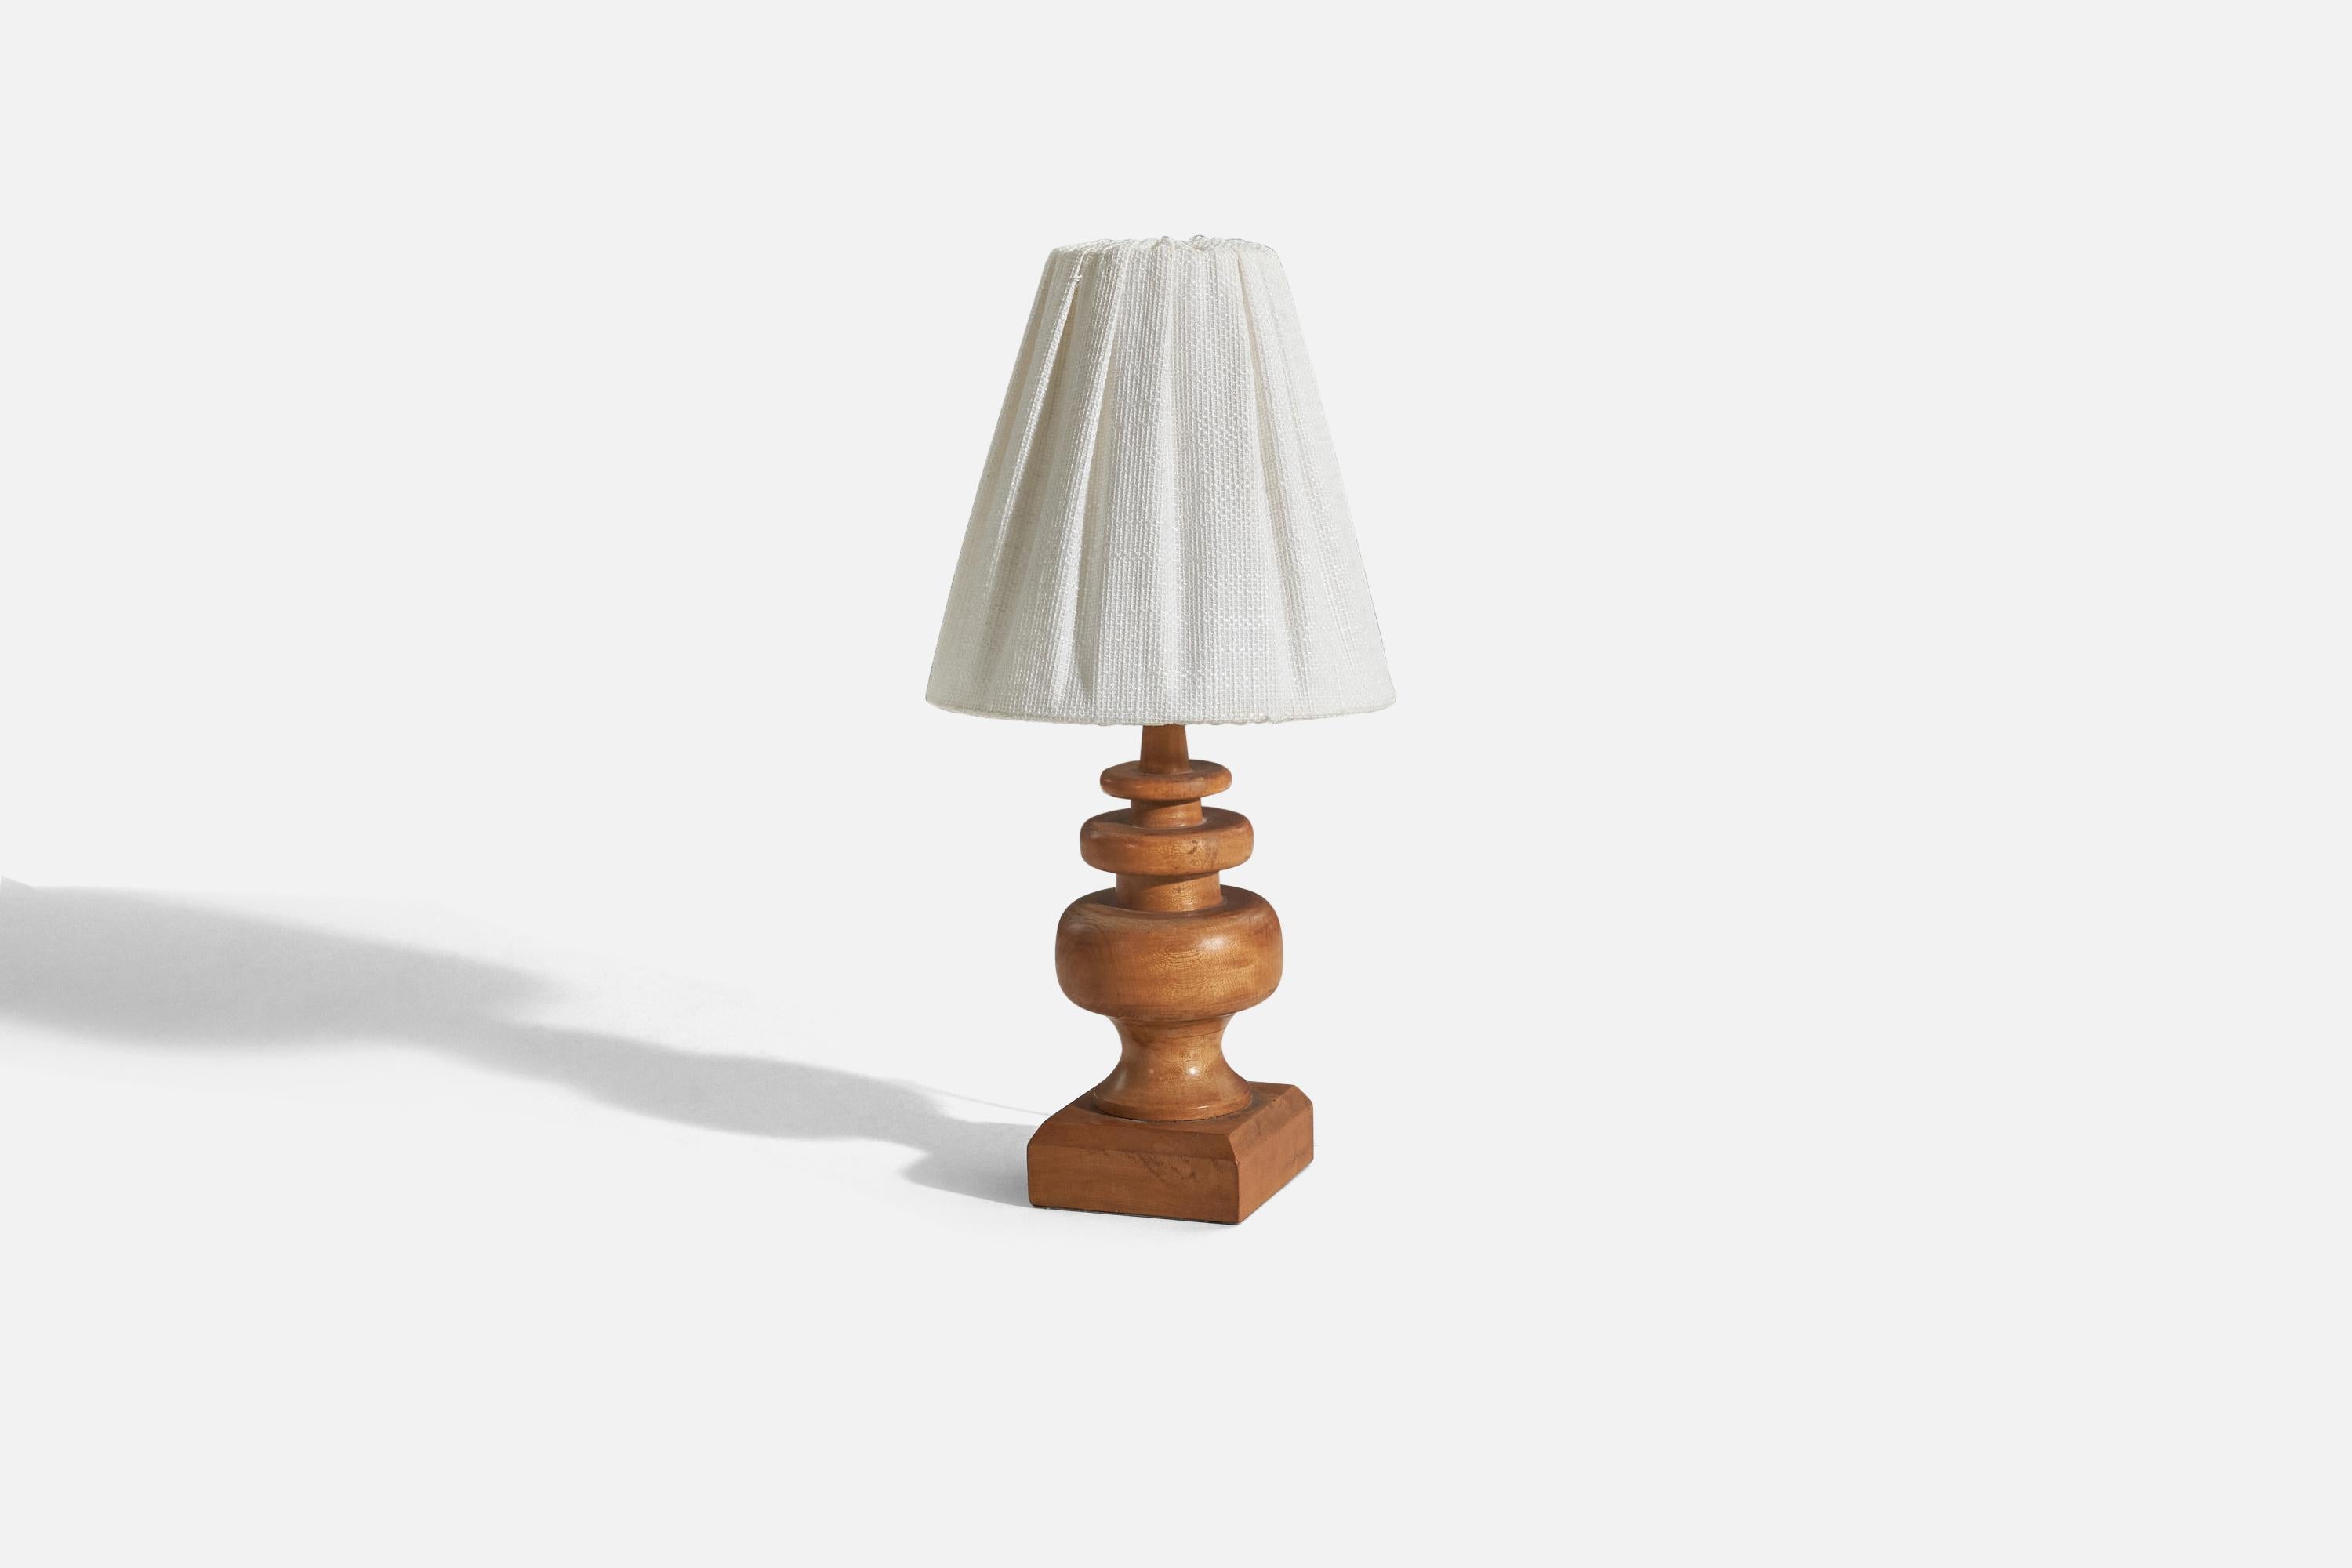 A wood and fabric table lamp designed and produced in the United States, c. 1950s. 

Sold with lampshade. 
Dimensions of Lamp (inches) : 11.18 x 3.87 x 4 (Height x Width x Depth)
Dimensions of Shade (inches) : 3.75 x 8 x 8 (Top Diameter x Bottom